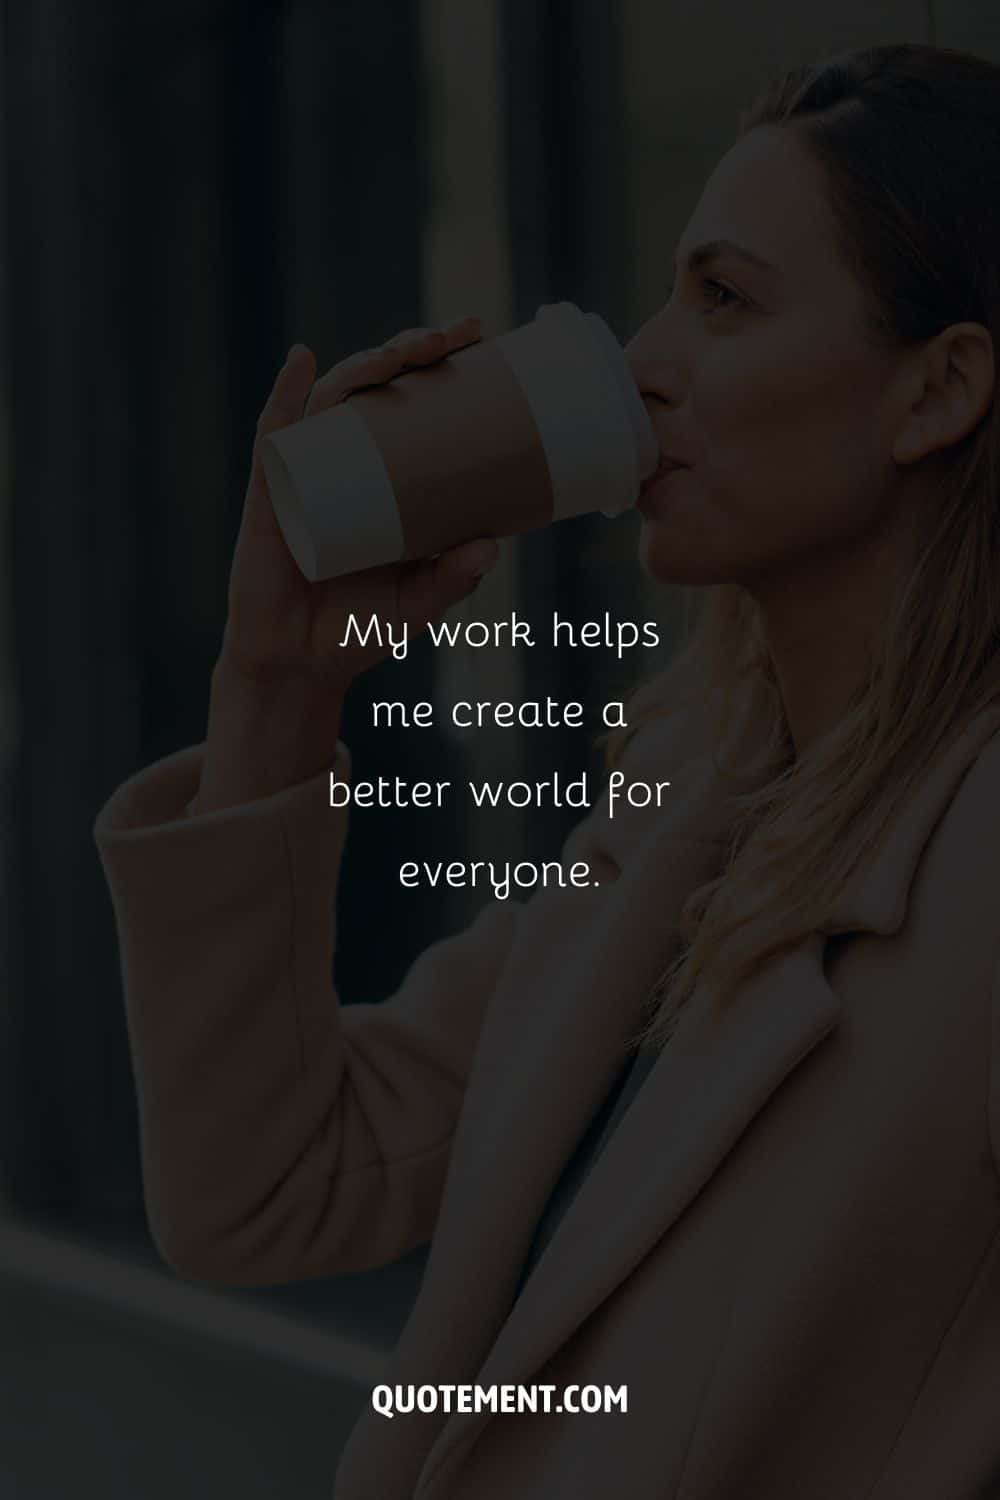 Woman with a coffee cup image representing an affirmation for work.